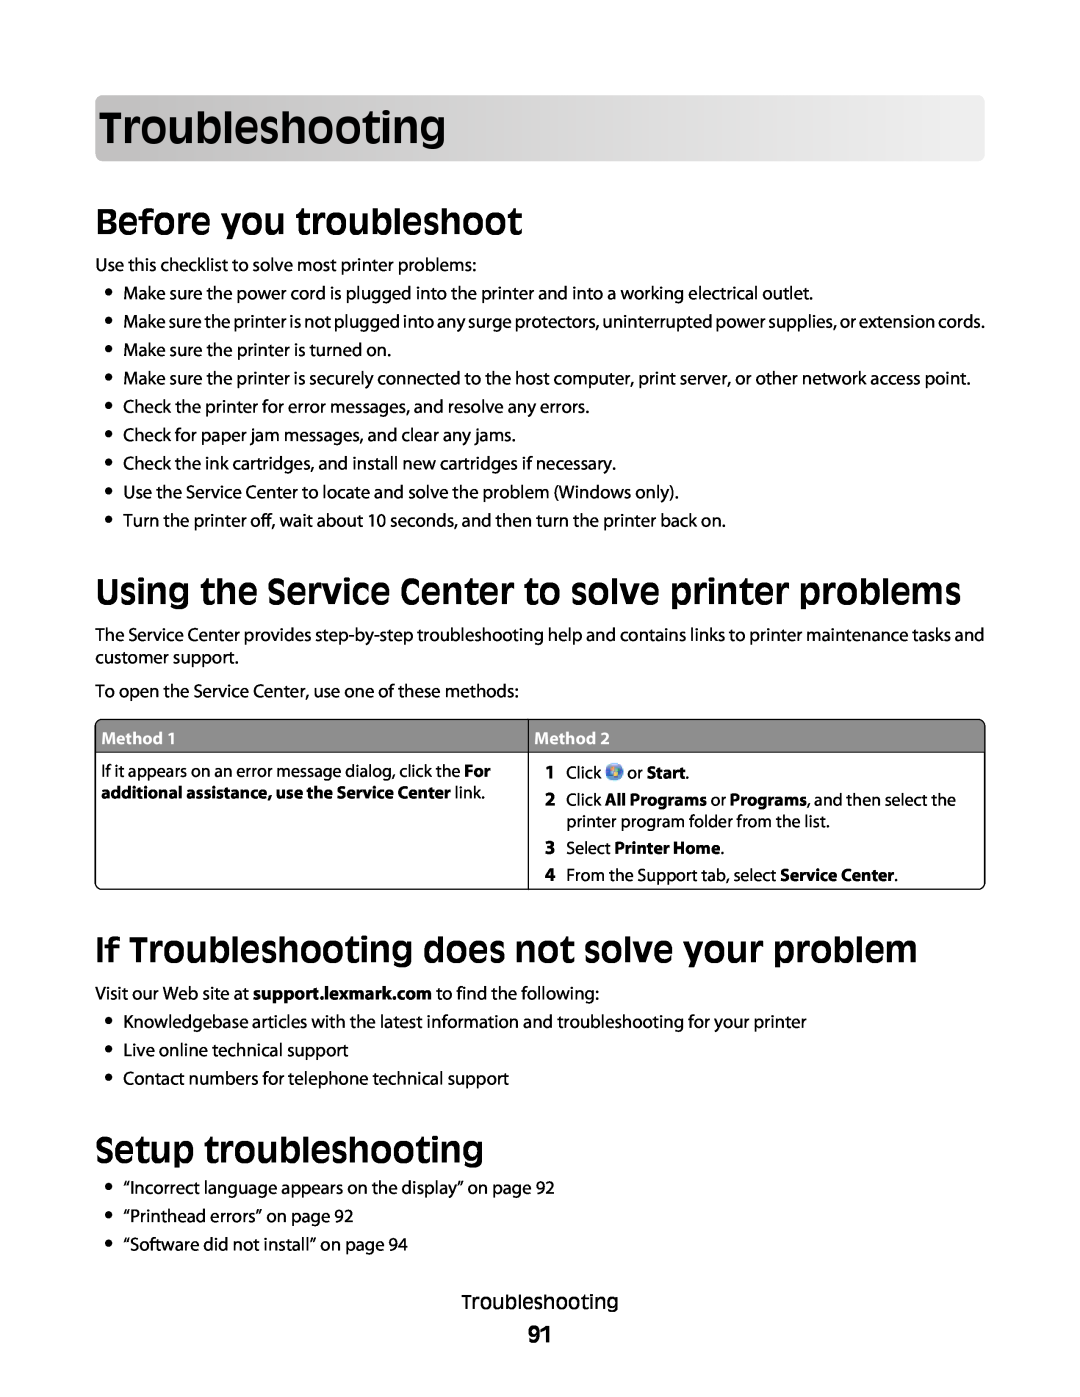 Lexmark 30E, S500, 301 manual Troubleshooting, Before you troubleshoot, Using the Service Center to solve printer problems 